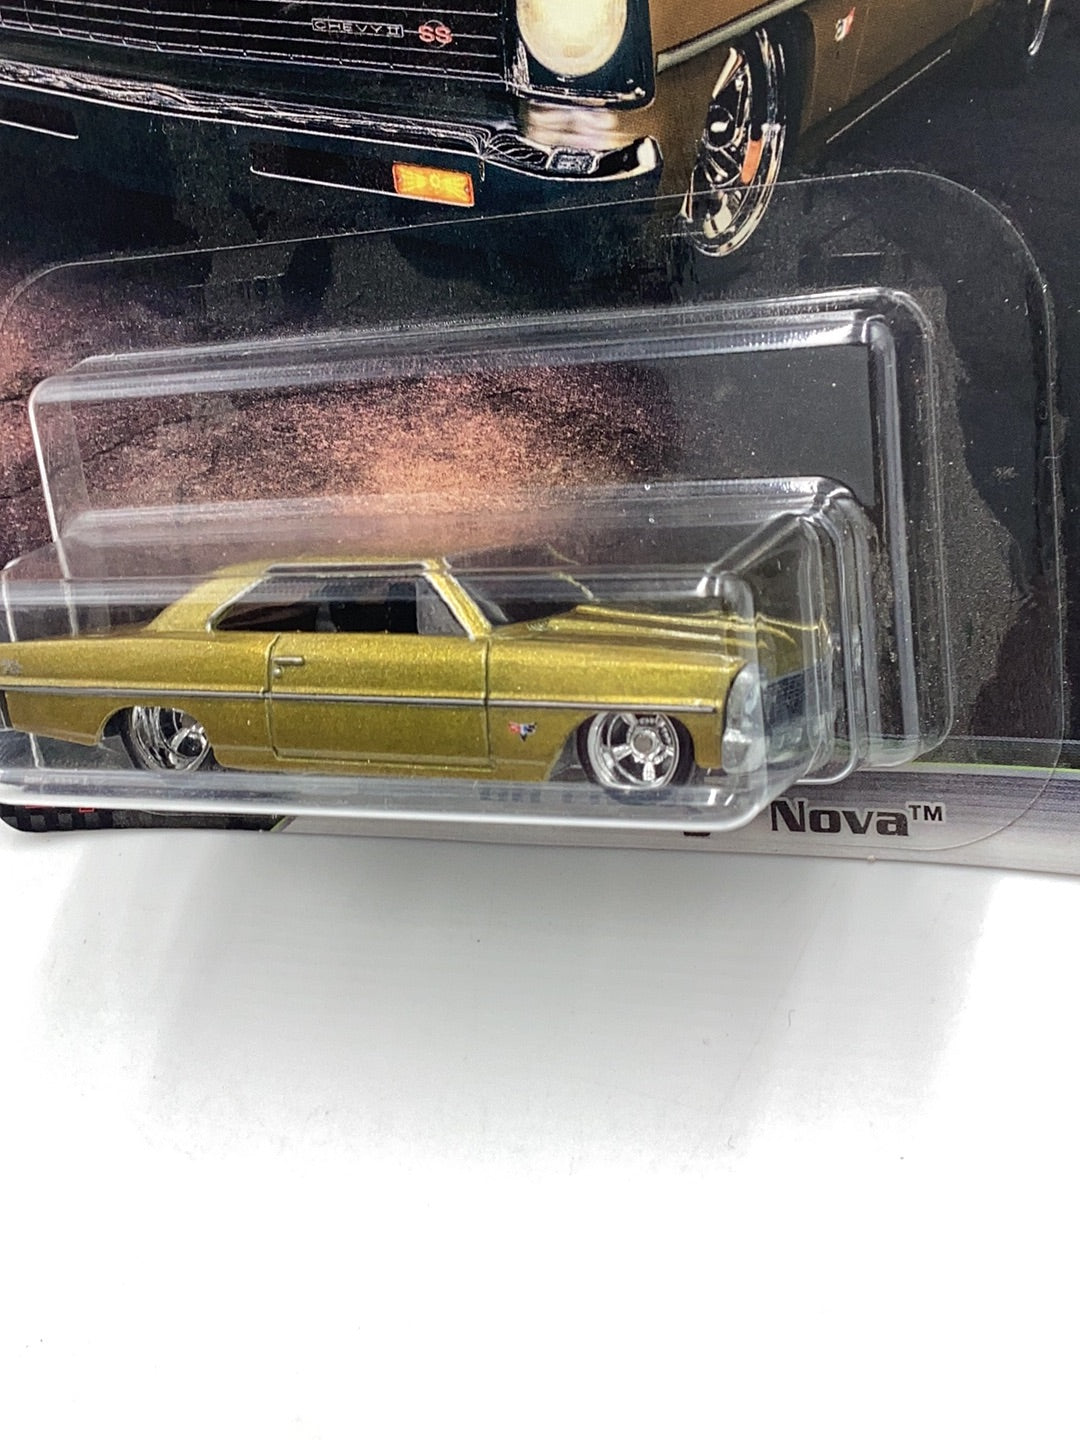 Hot wheels fast and furious Motor City Muscle #4 66 Chevy Nova 249B